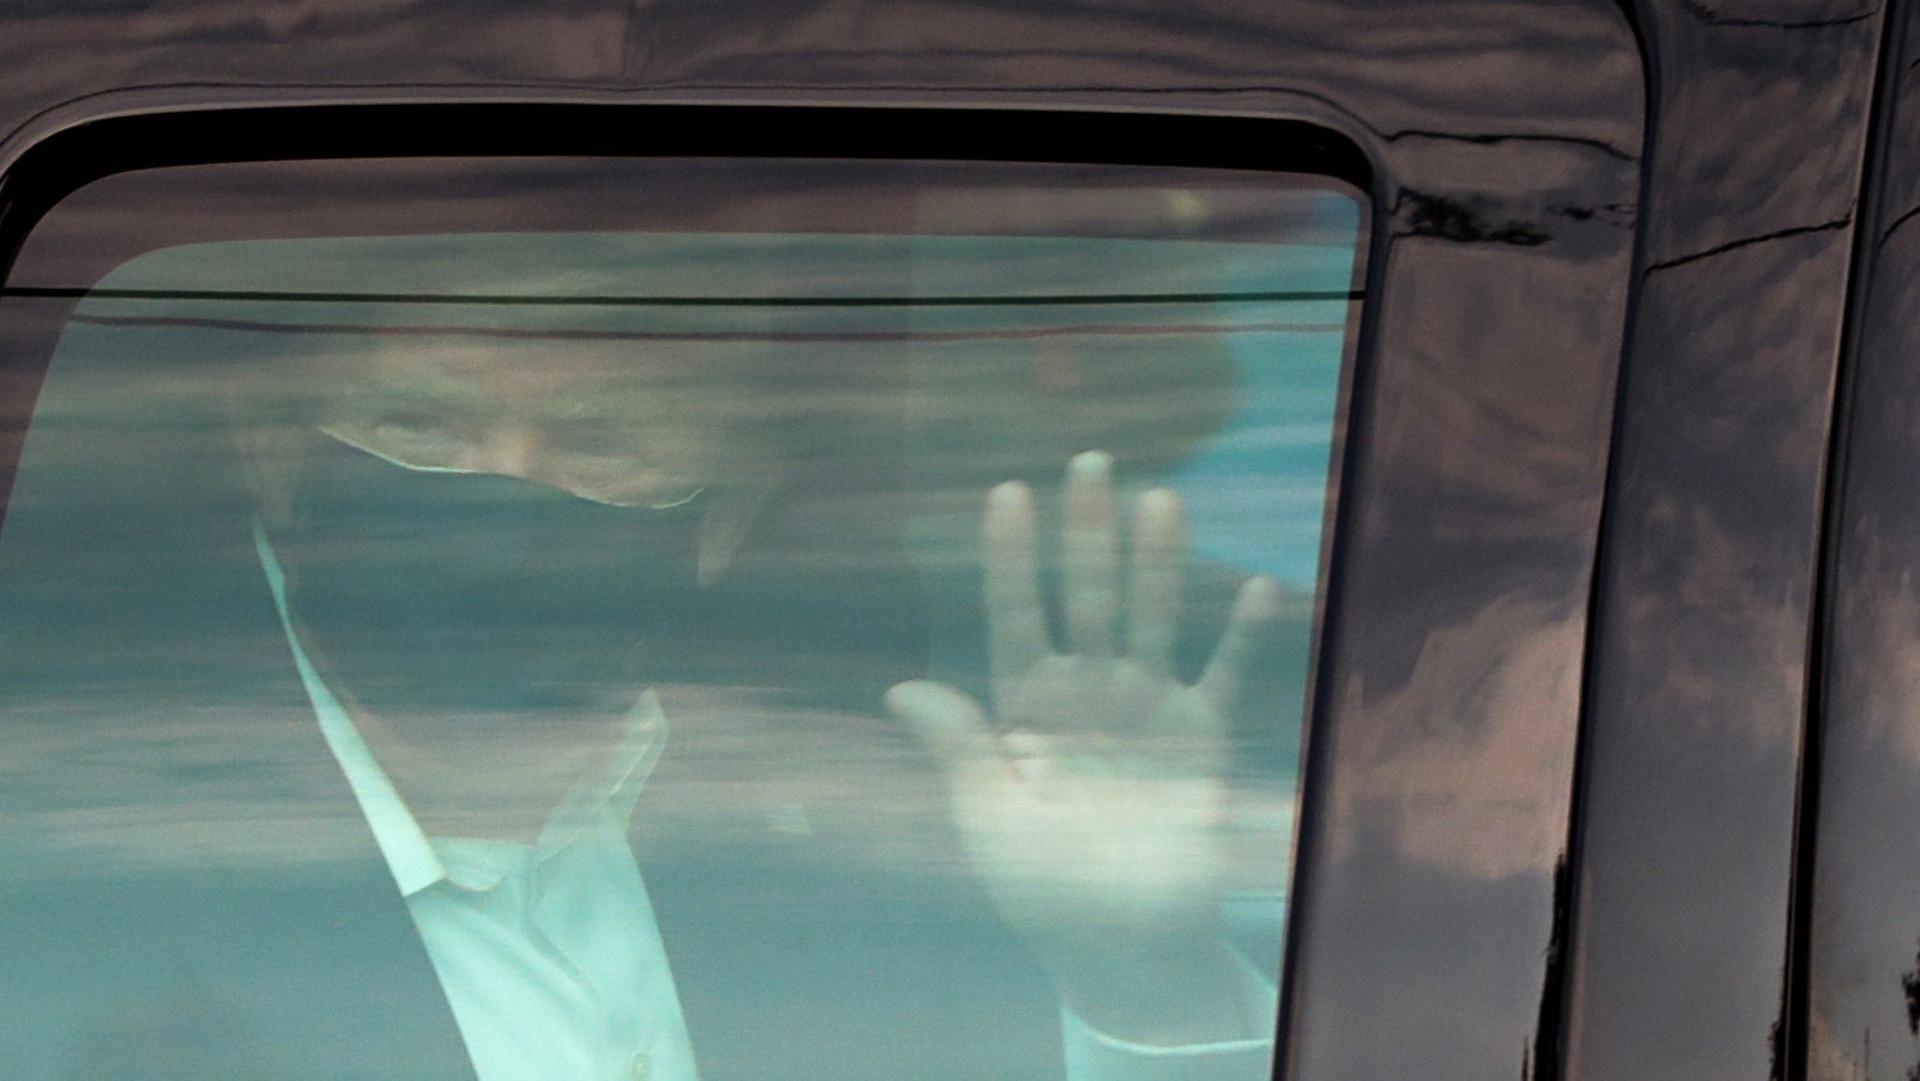 President Donald Trump waves to supporters as he briefly rides by in the presidential motorcade in front of Walter Reed National Military Medical Center, where he is being treated for the coronavirus in Bethesda, Maryland, Oct. 4, 2020.  